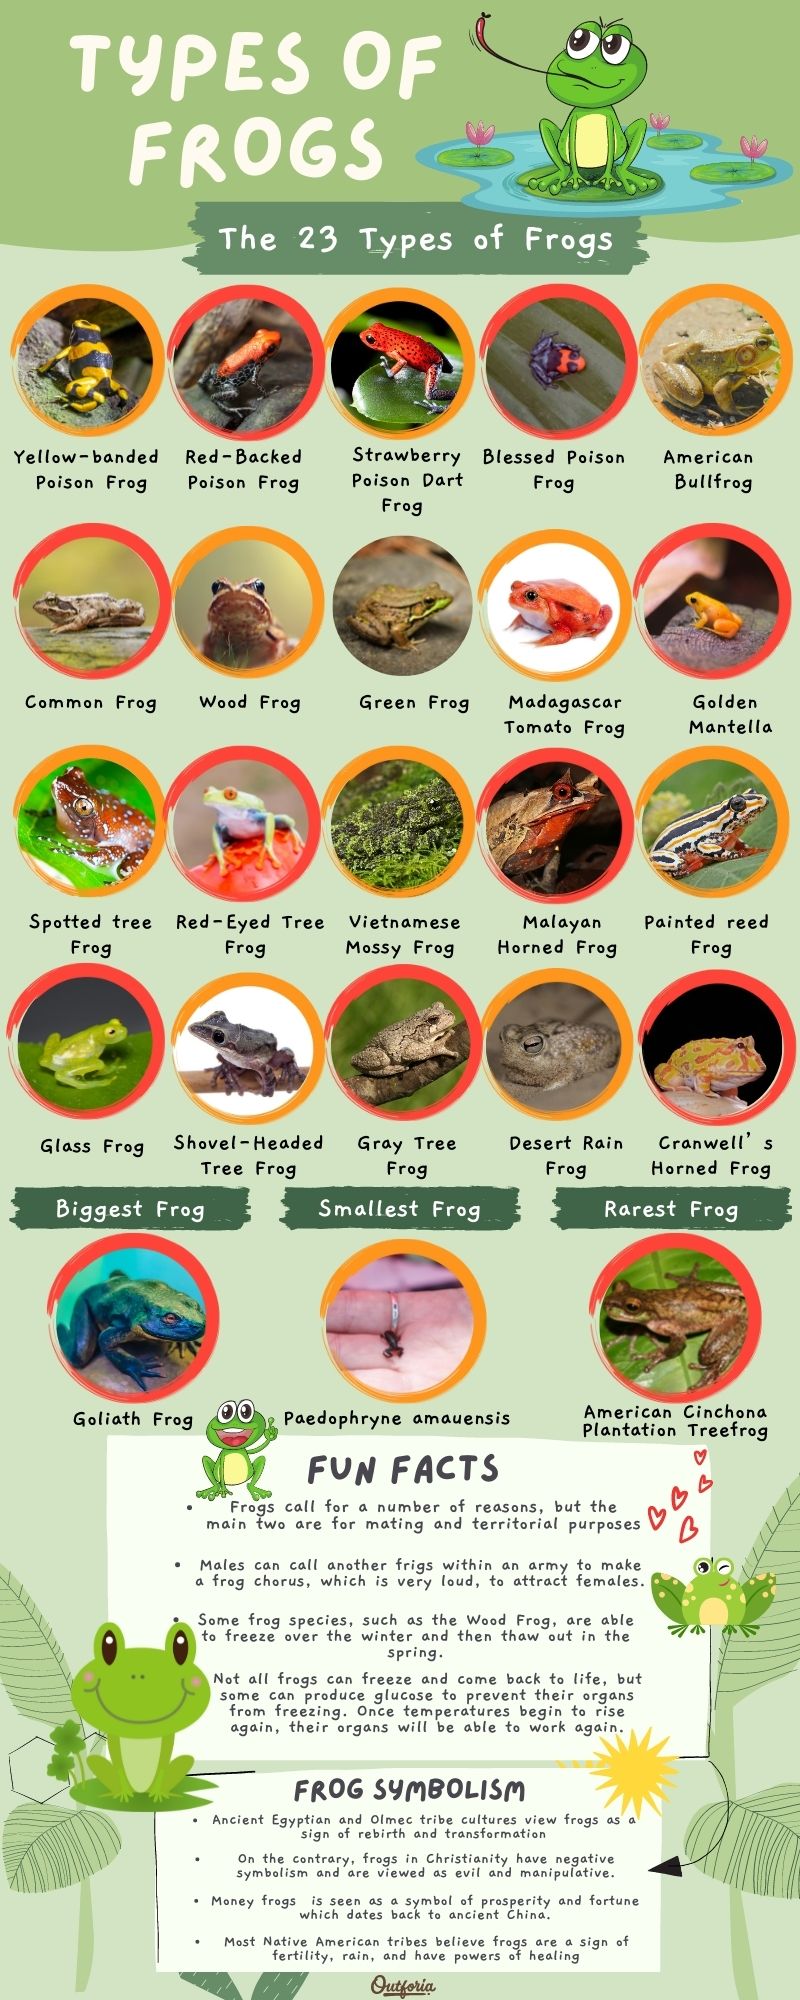 chart of the 23 types of frogs with names, images, and fun facts